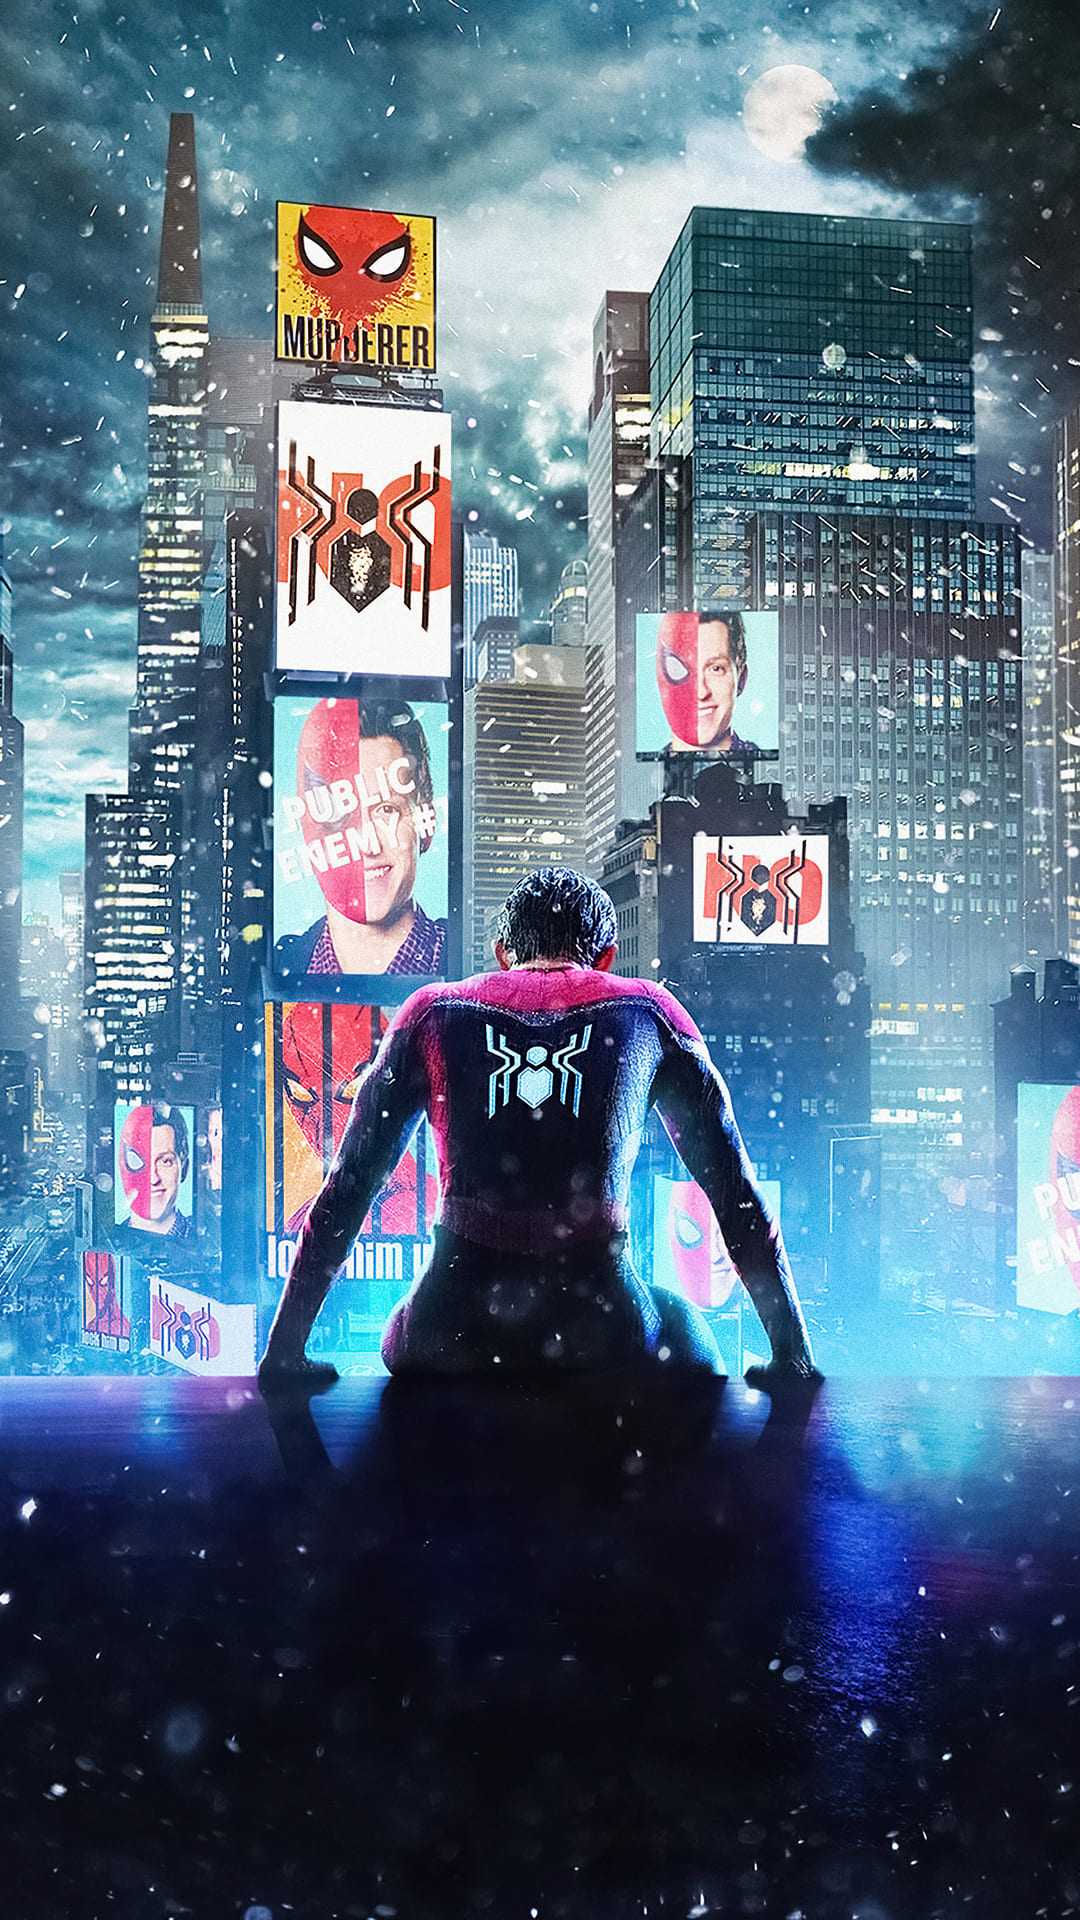 Spider-Man: No Way Home Wallpapers